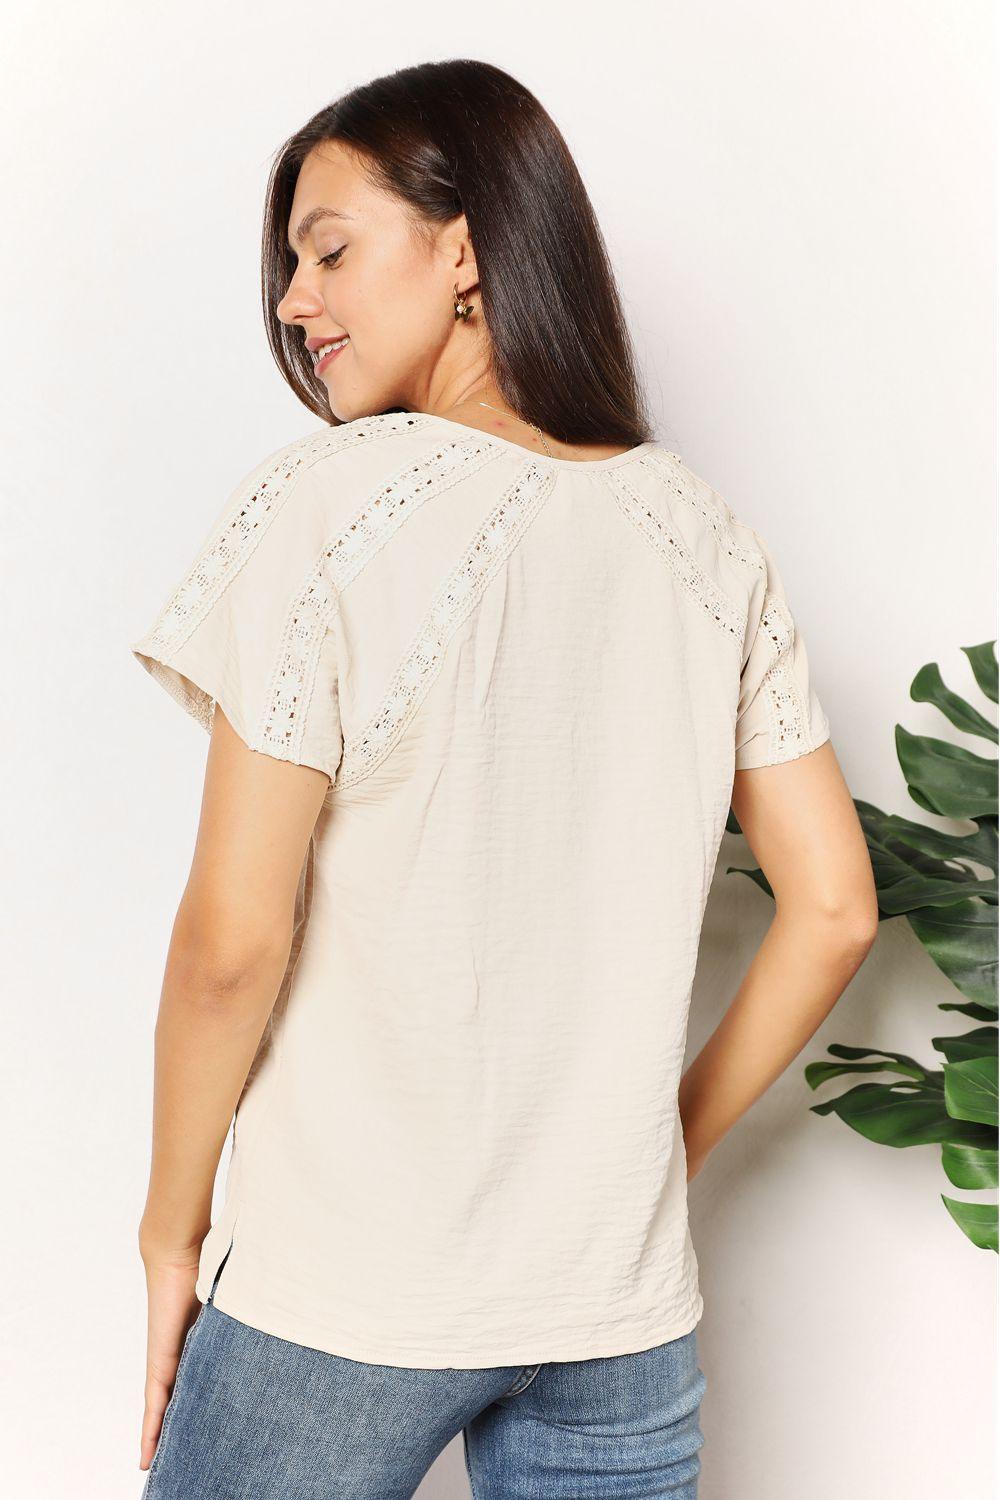 Double Take Crochet Buttoned Short Sleeves Top - Lab Fashion, Home & Health